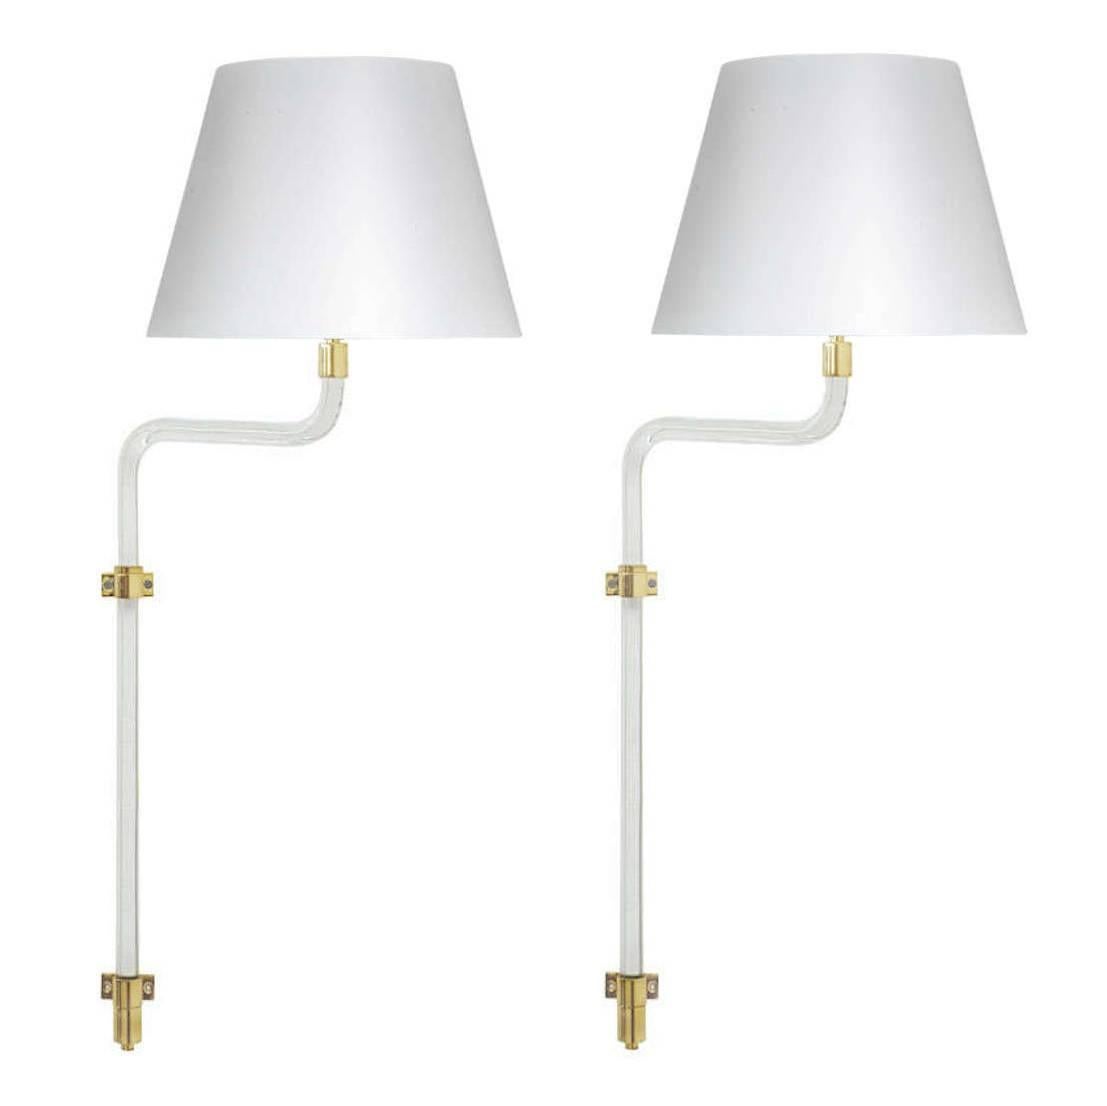 Pair of 1970s Peter Hamburger for Knoll Lucite and Brass Wall Sconces